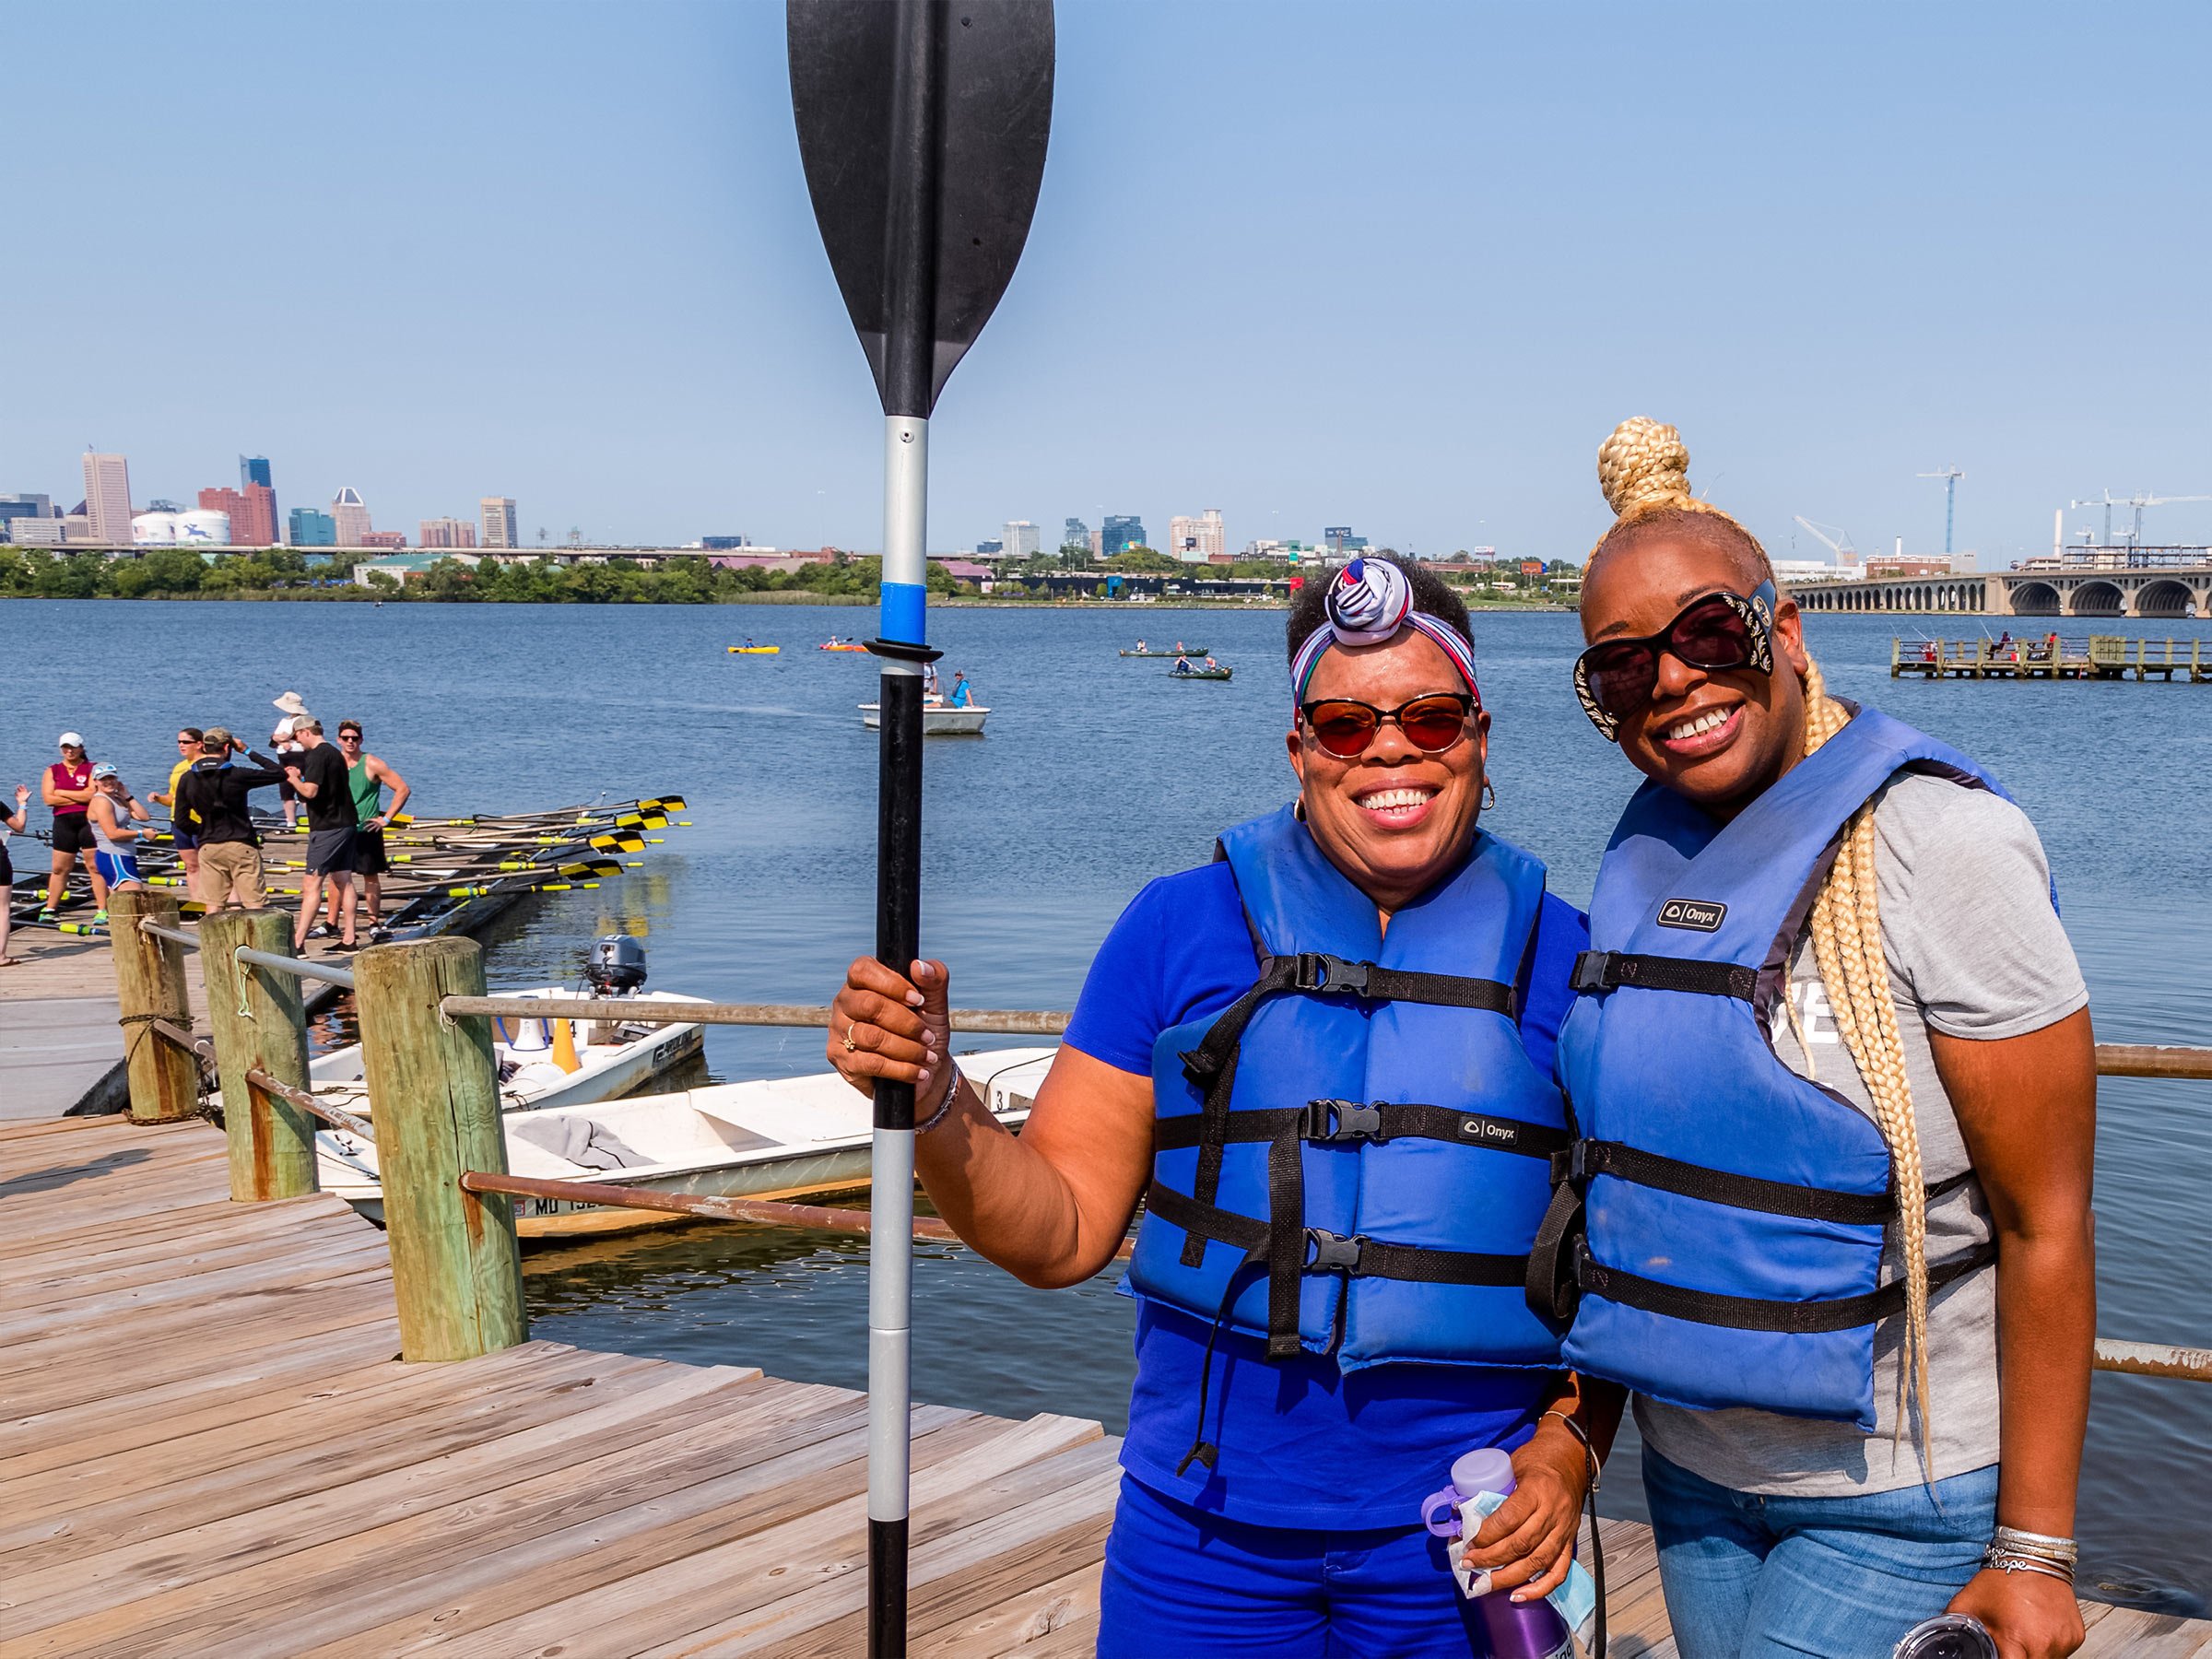  Two women smile together on boathouse dock. They hold a paddle and sport life vests. People in canoes and kayaks are behind them. 